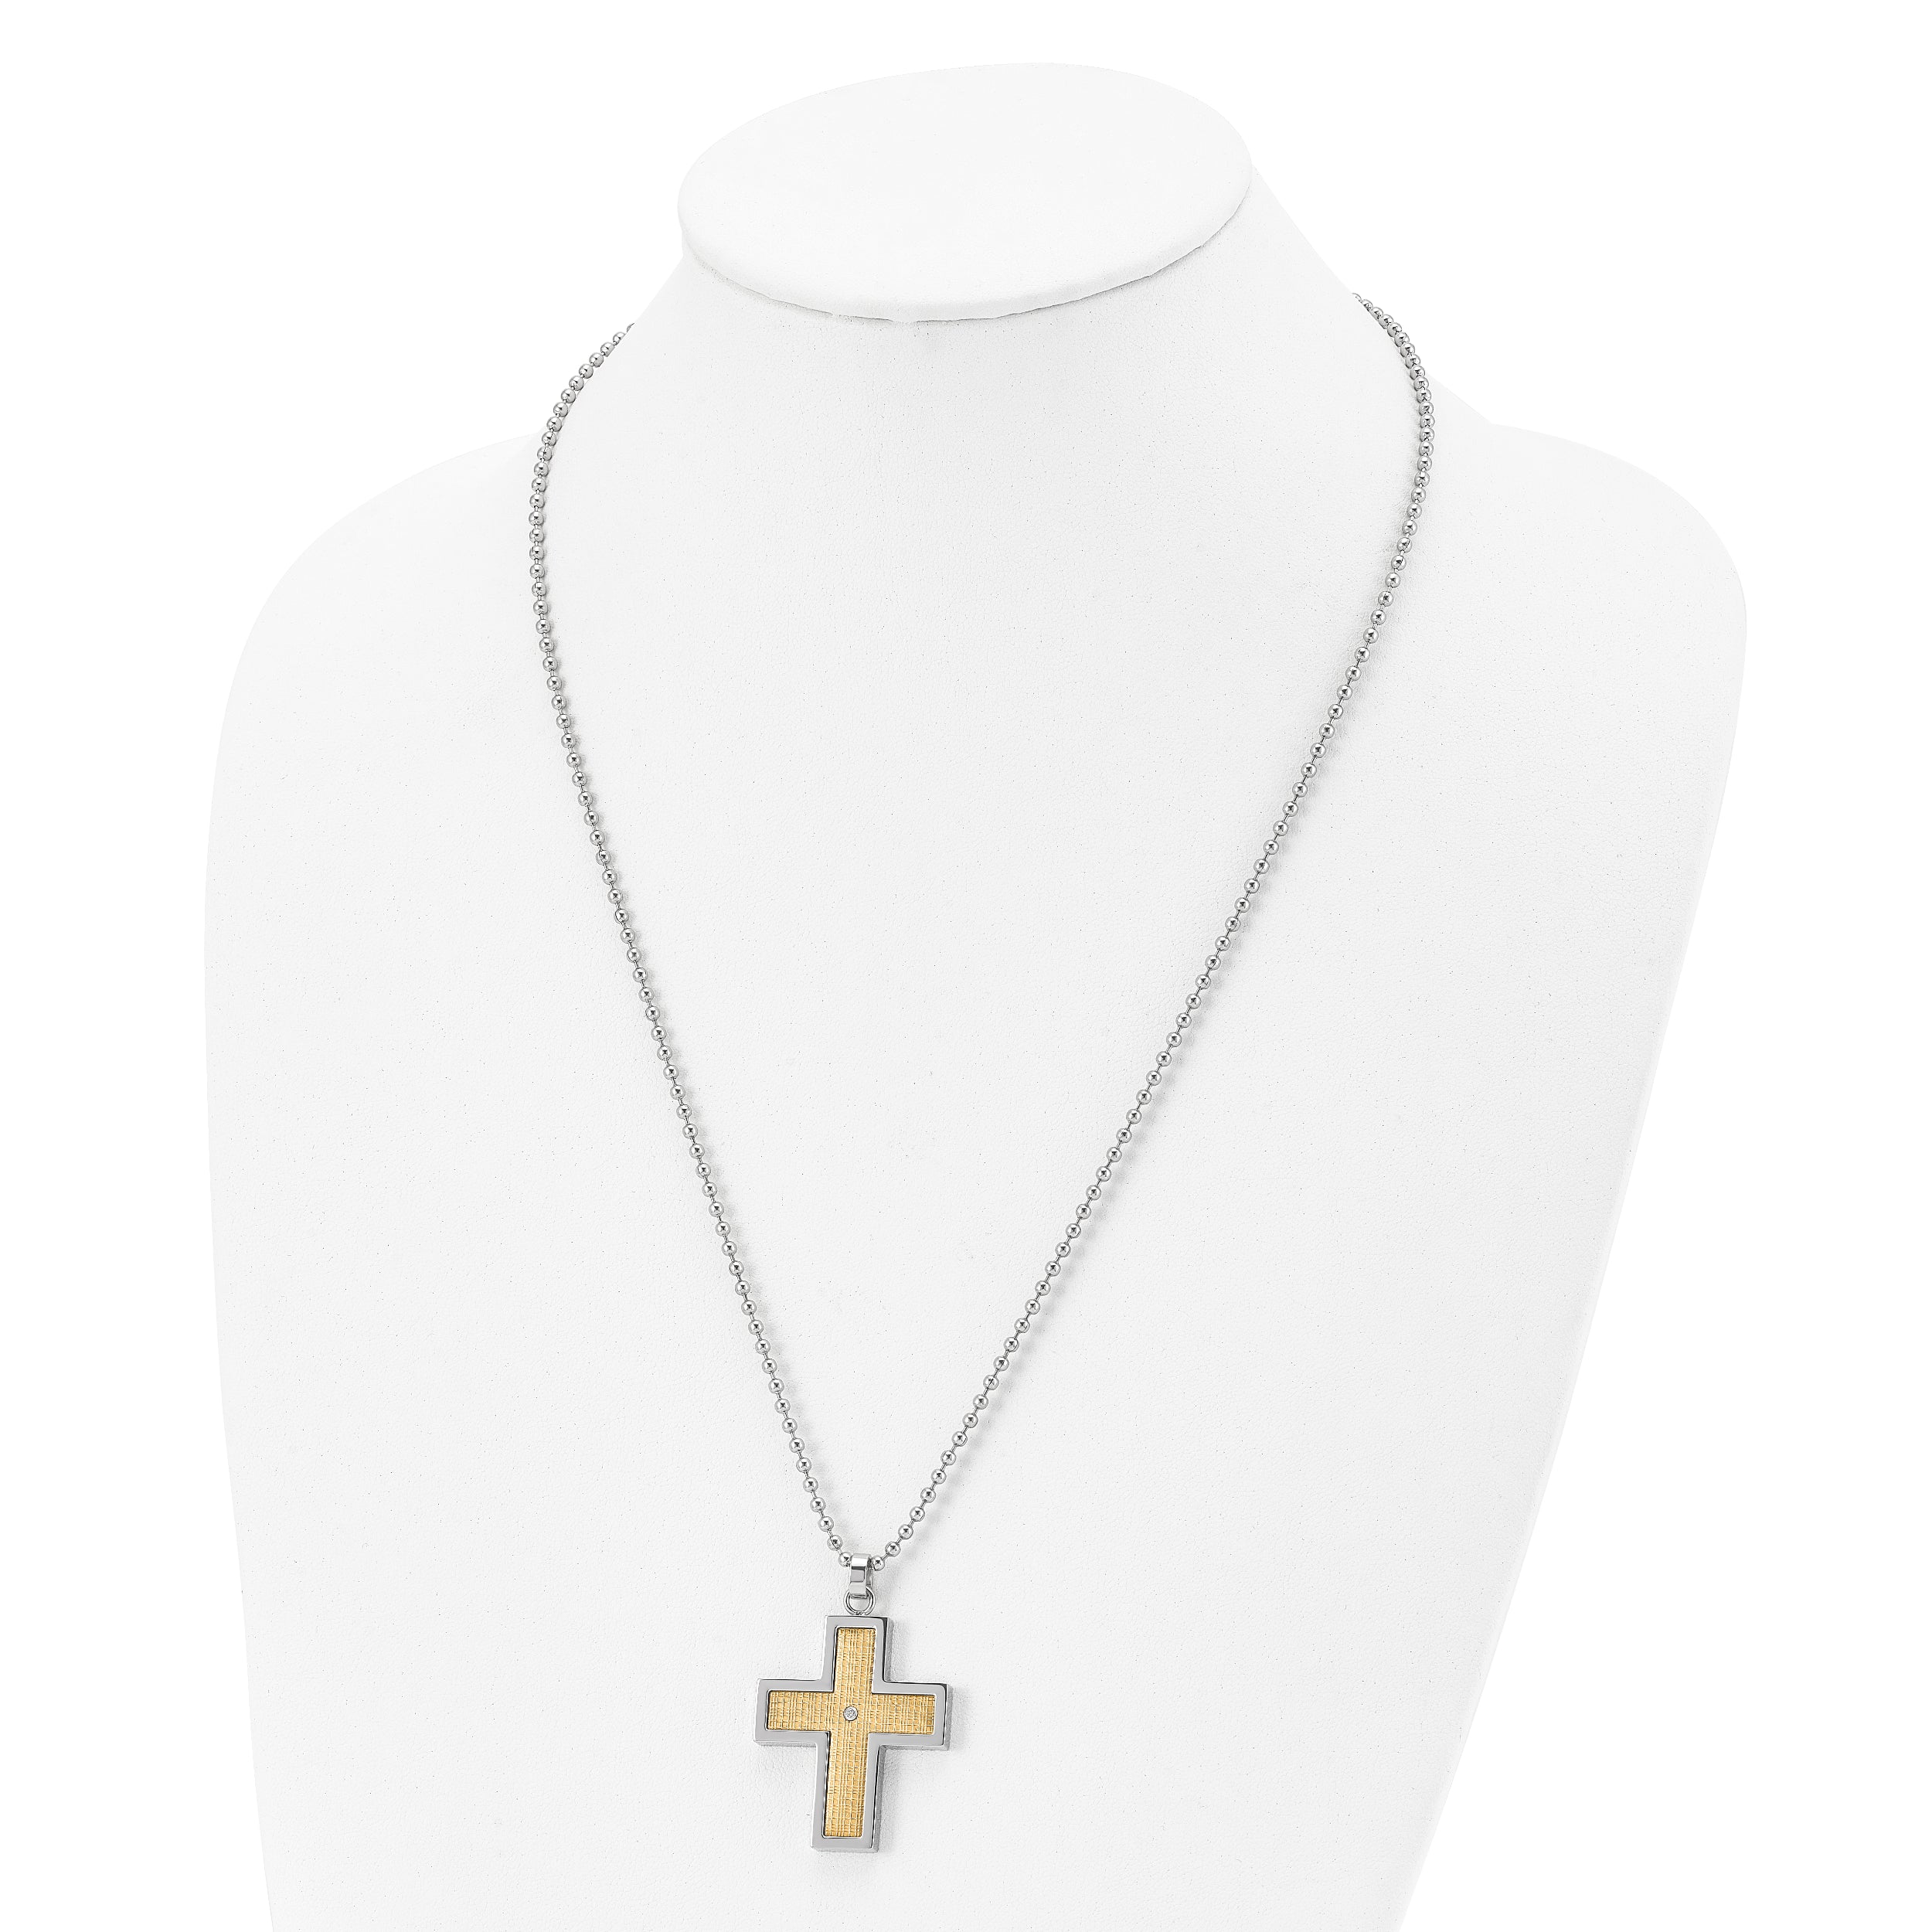 Chisel Stainless Steel Polished with 18k Gold Accent .02 carat Diamond Cross Pendant on a 24 inch Ball Chain Necklace